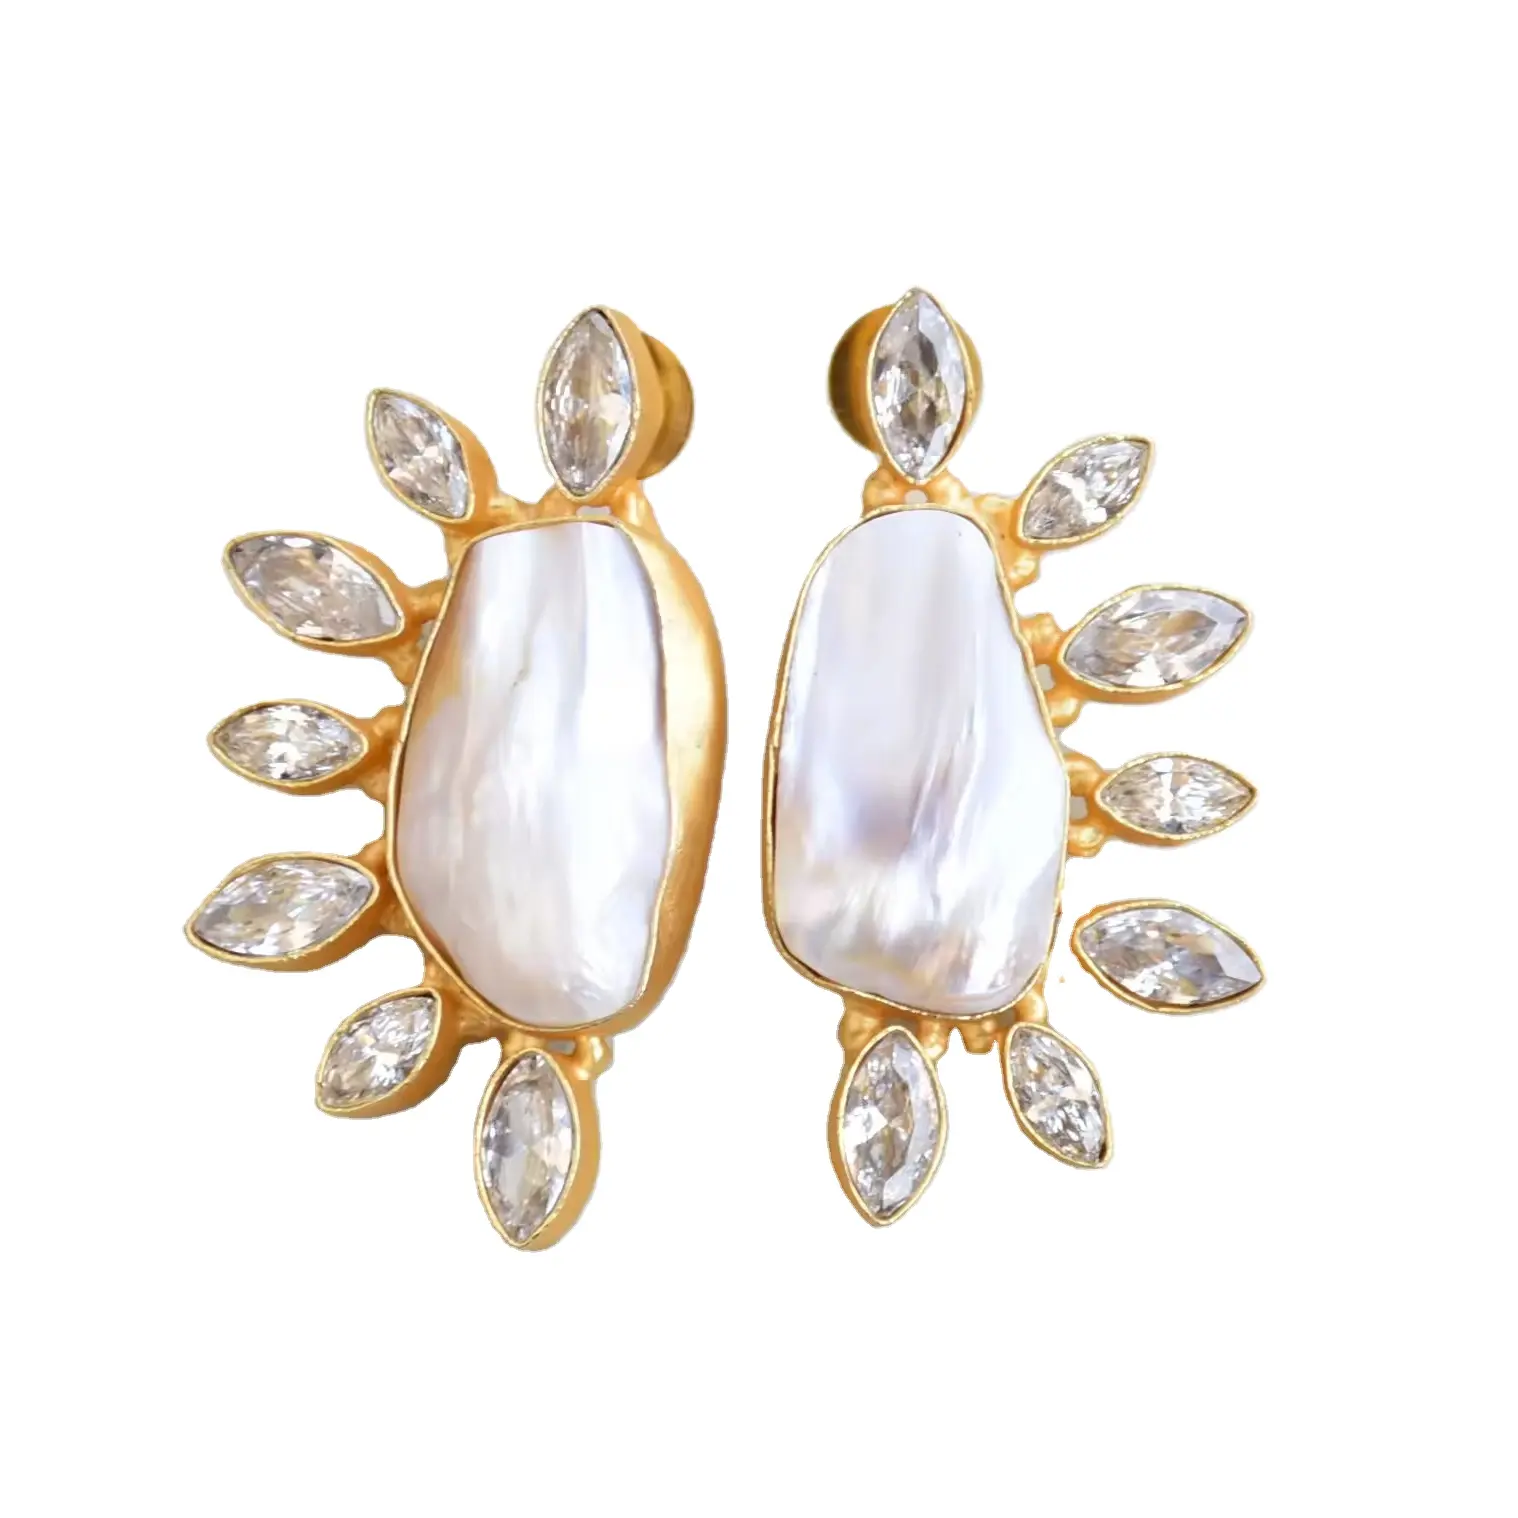 Uneven Natural Pearl Statement Earring Studs with High Quality Zircons Unique Designer Stud Earrings Freshwater Pearl Jewelry